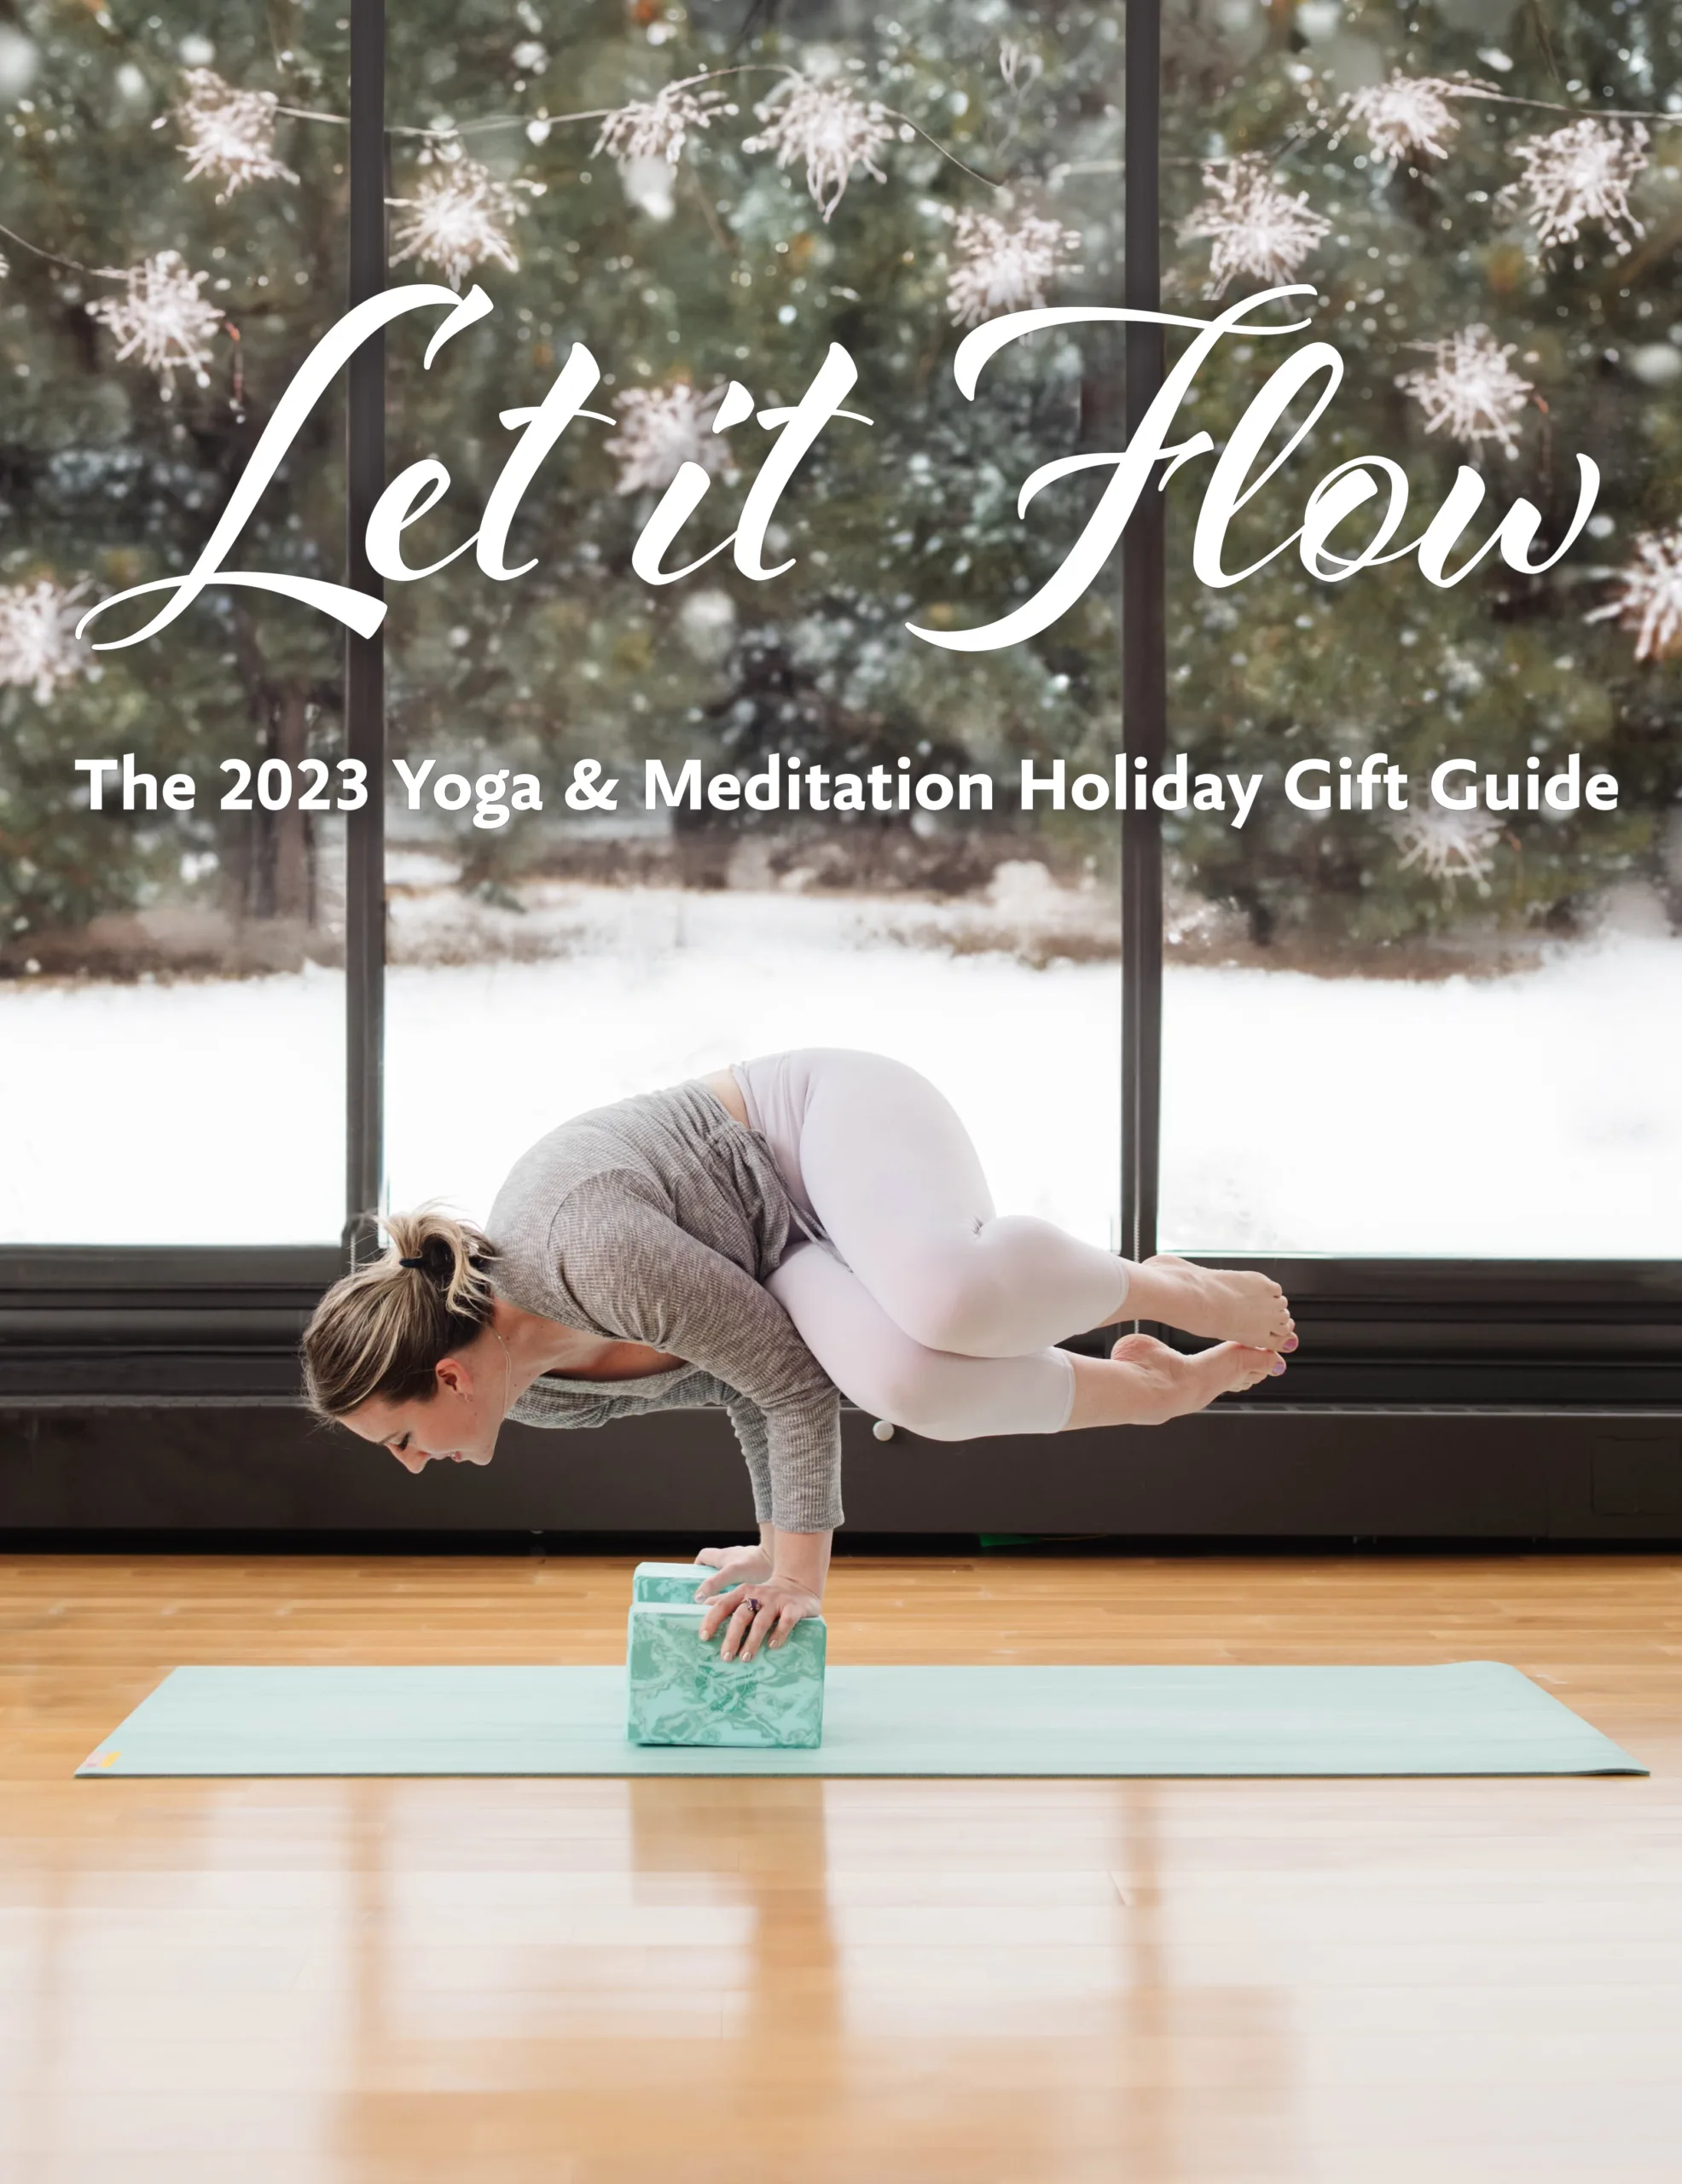 Let if Flow - The 2023 Yoga & Meditation Holiday Gift Guide